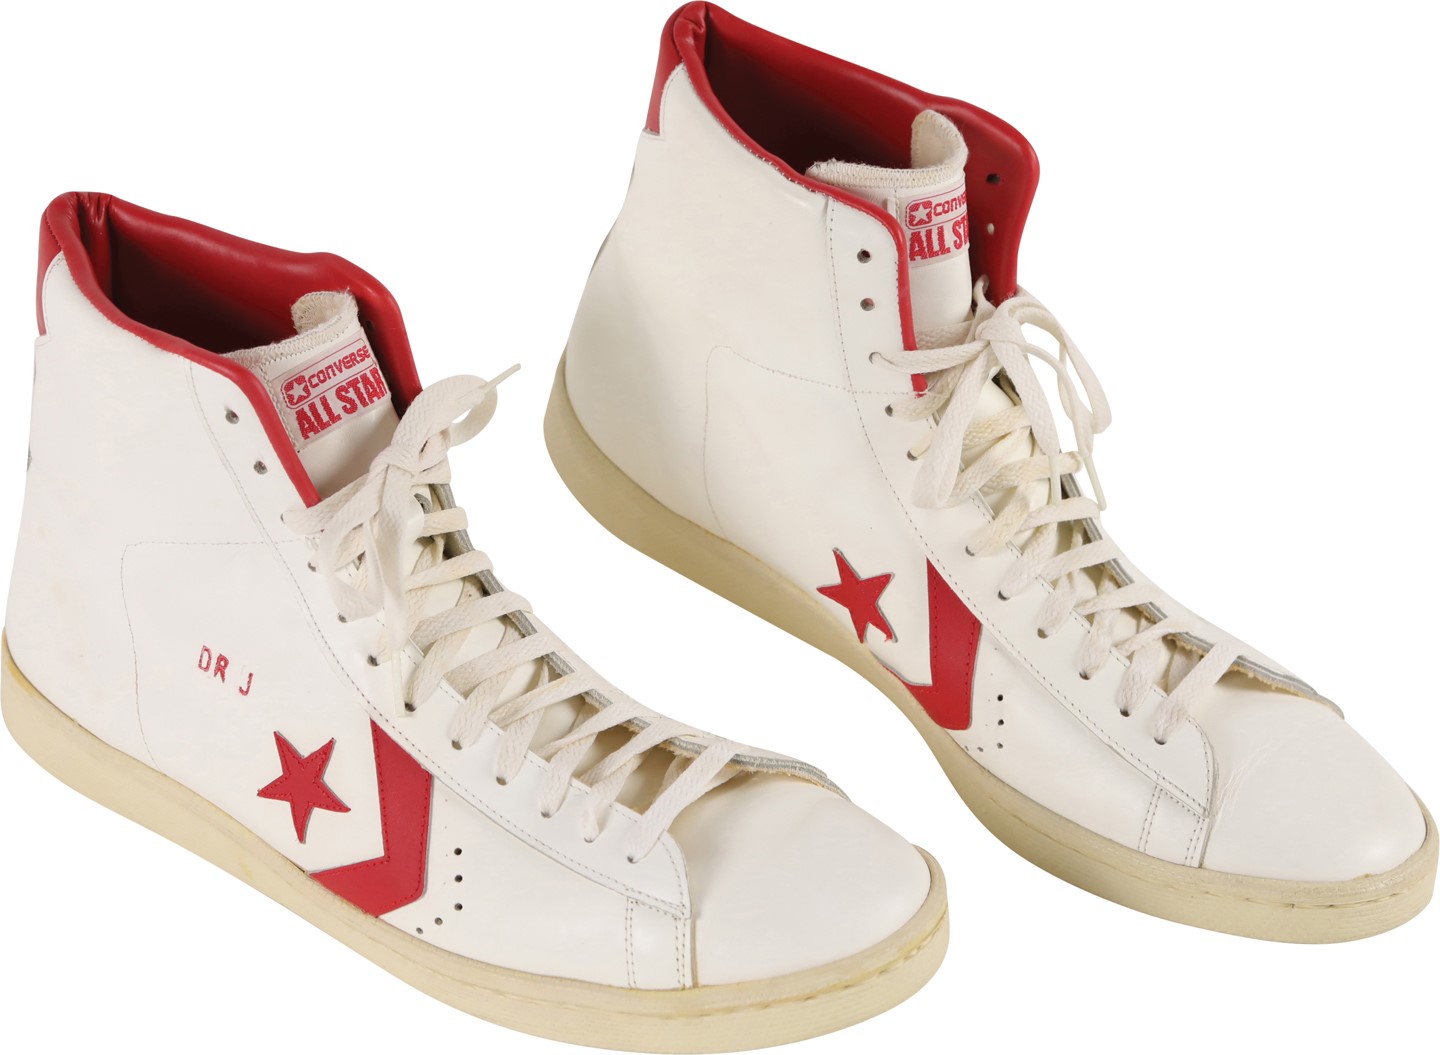 - Late 1970s Julius "Dr. J" Erving Game Worn Converse Sneakers